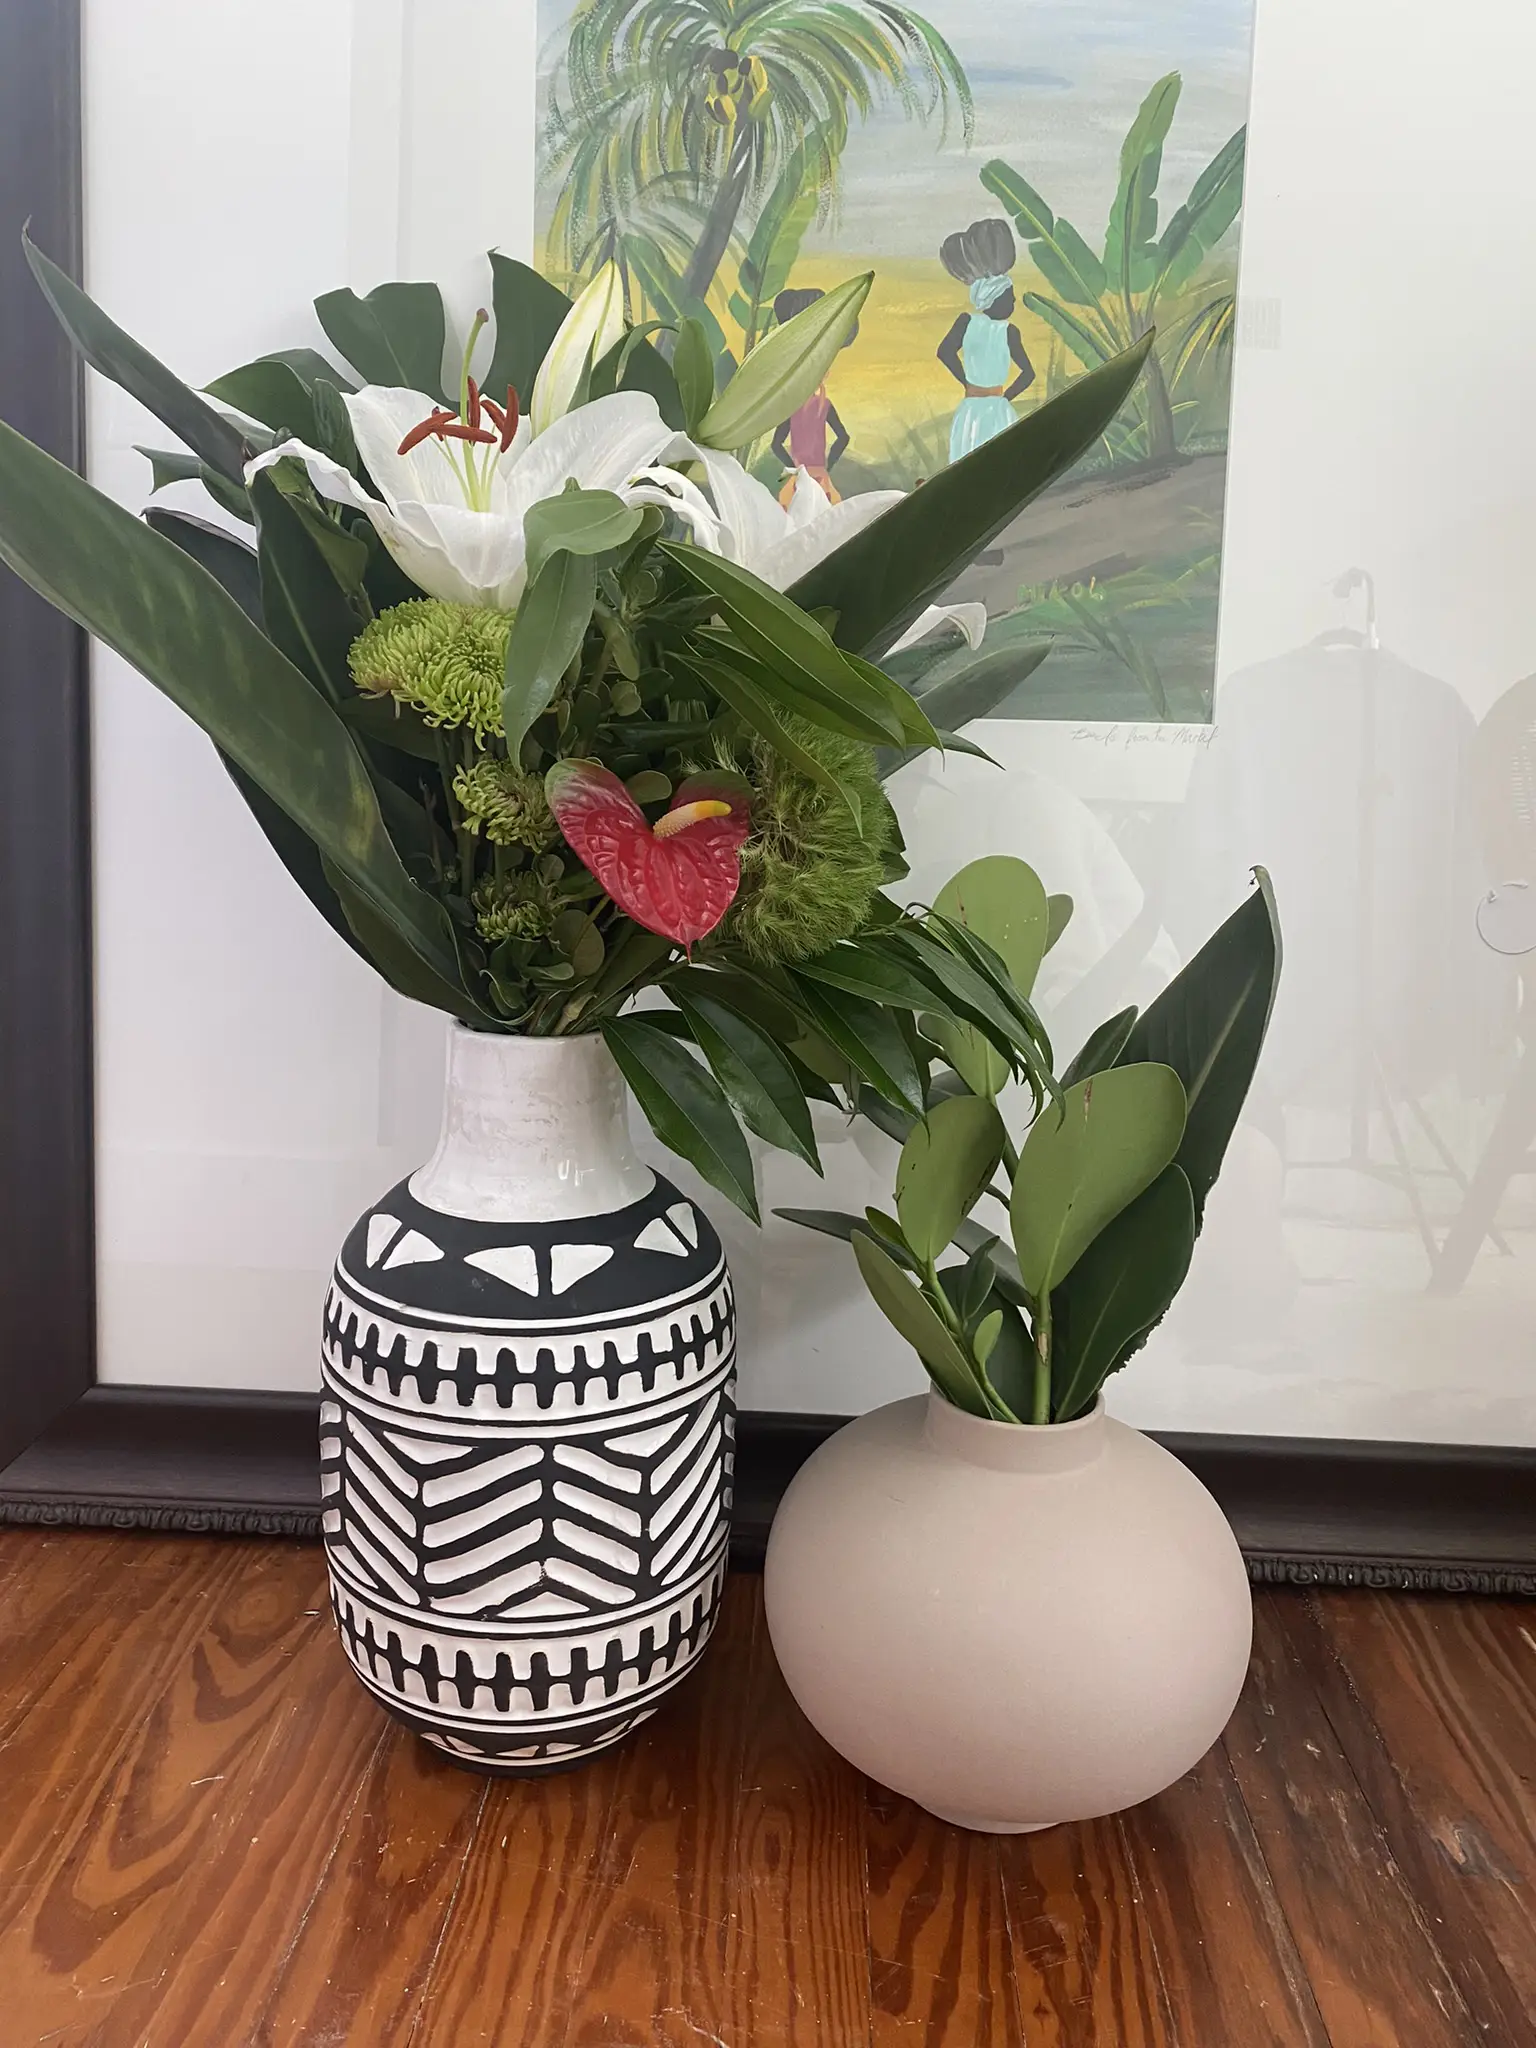 Tropical Home Design: Flowers, Art, Vases, Gallery posted by Stephanie  Volk